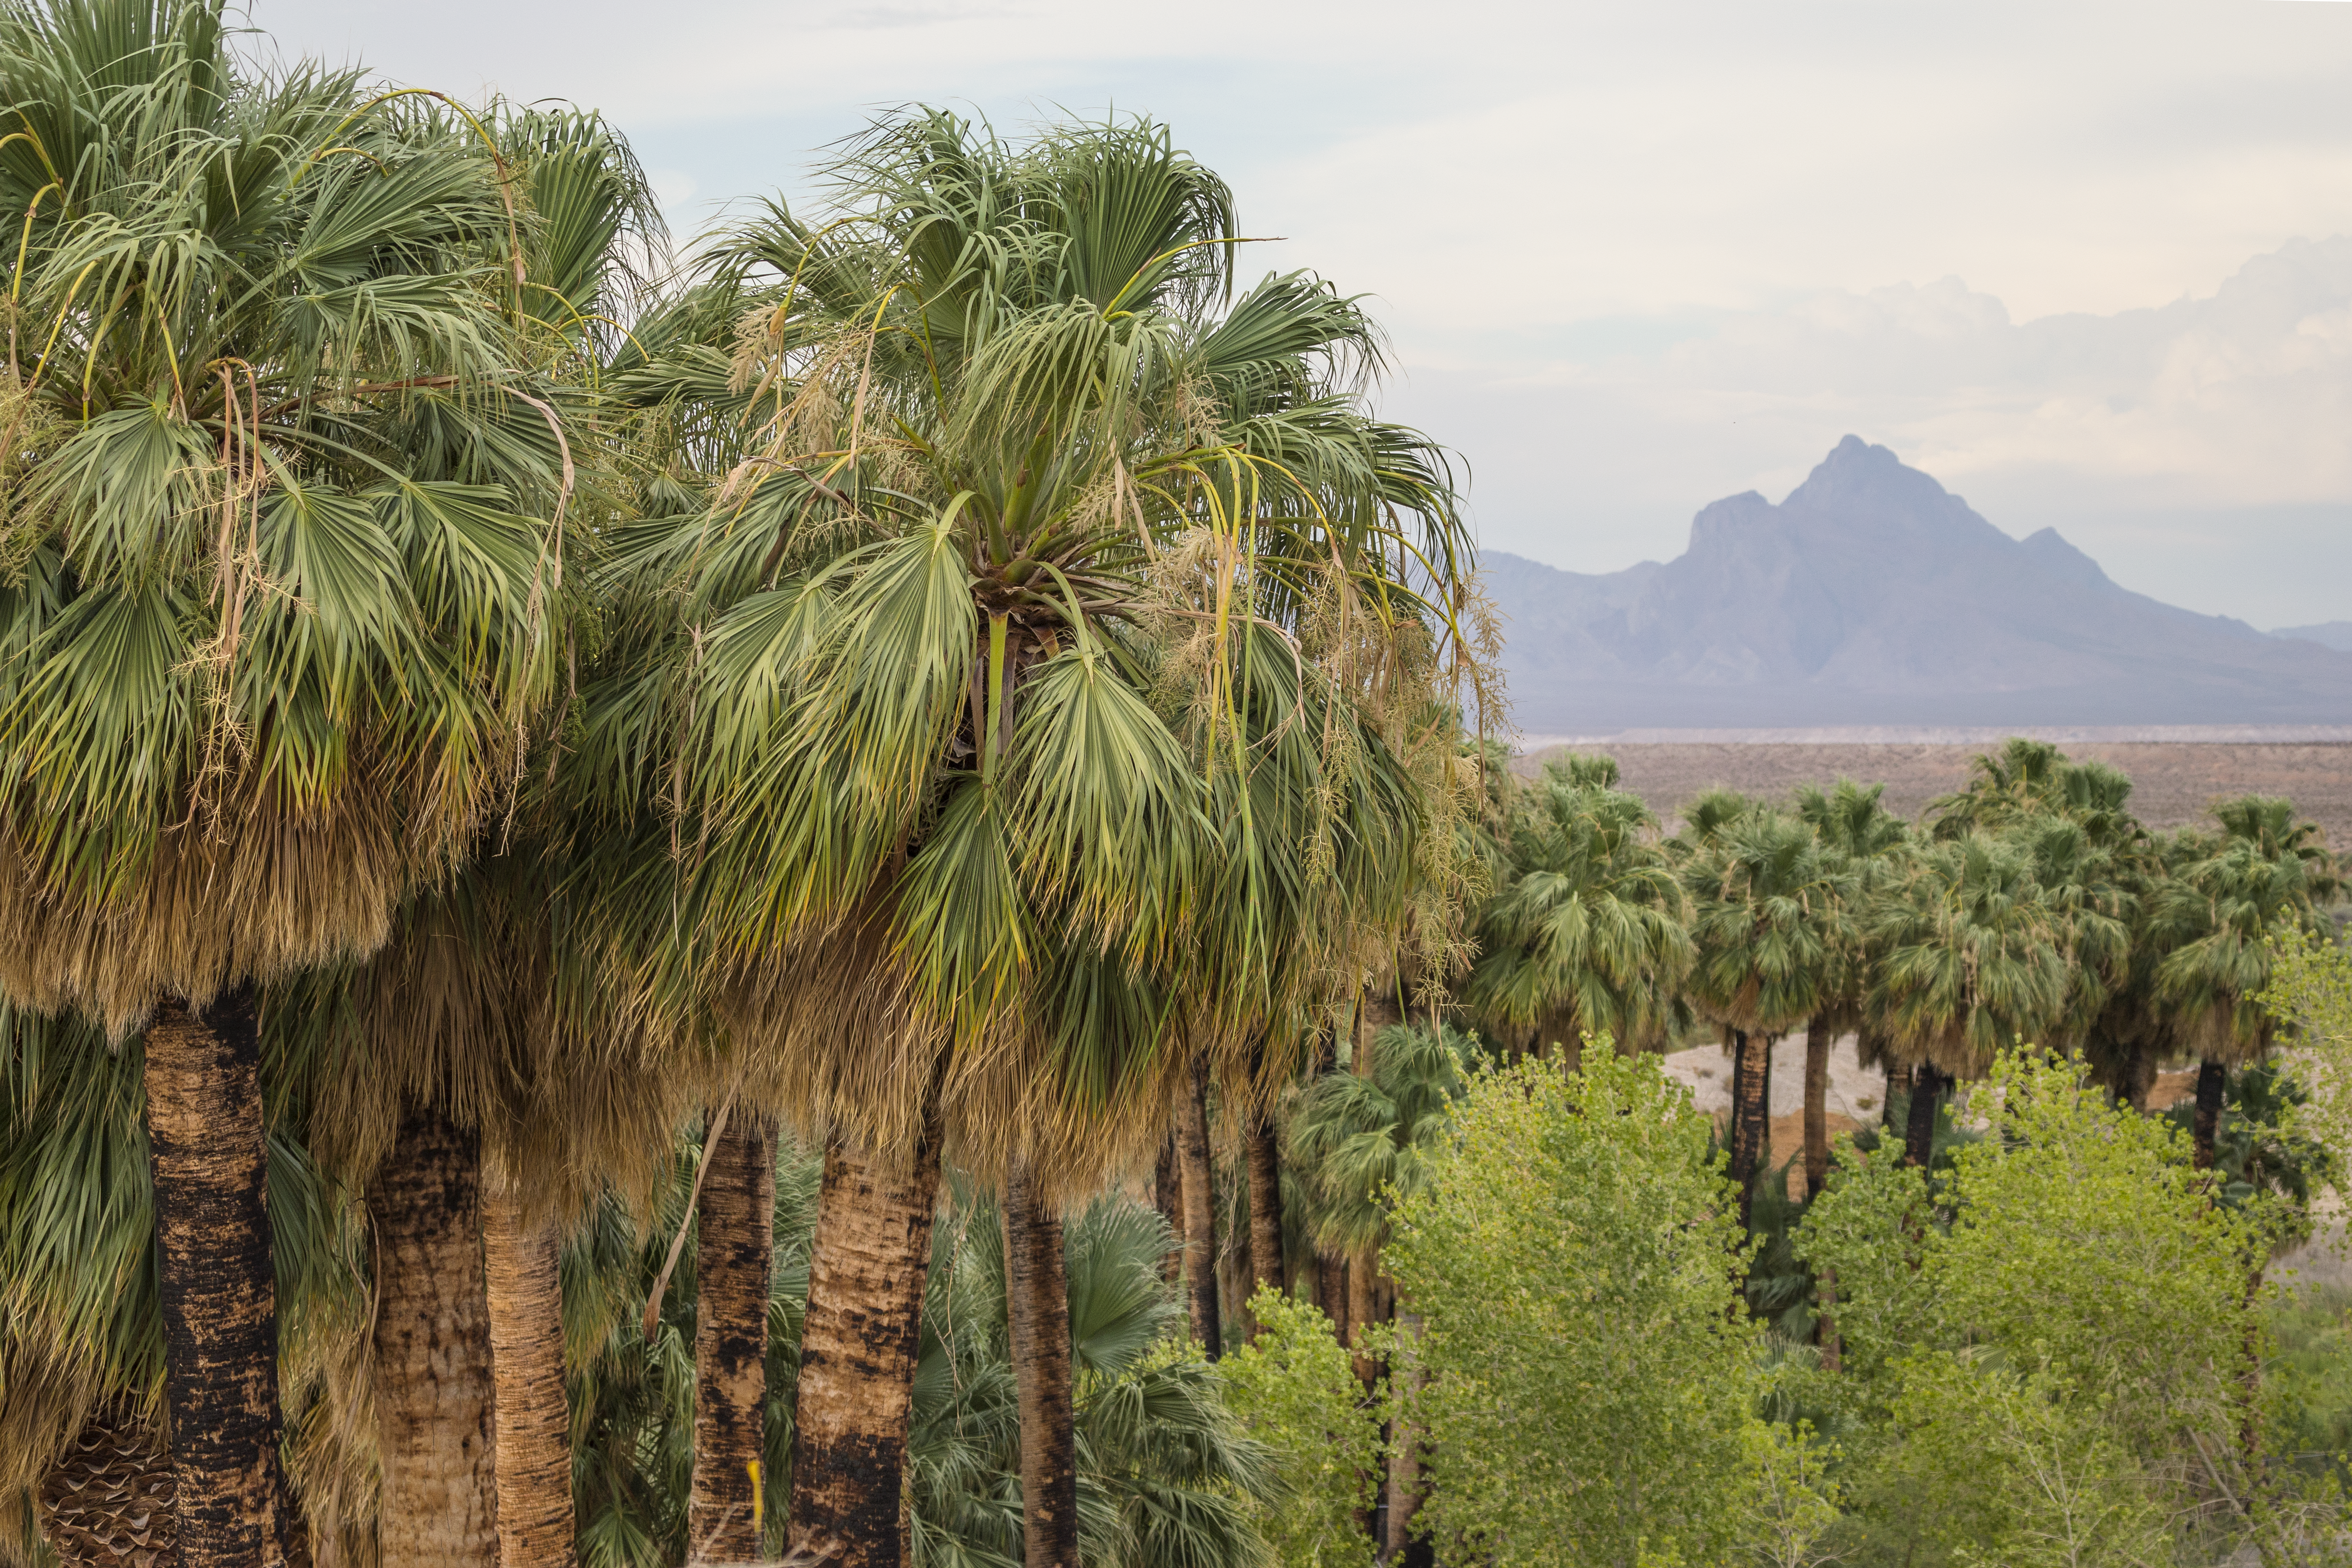 Palm trees in the foreground and a mountain peak in the distance